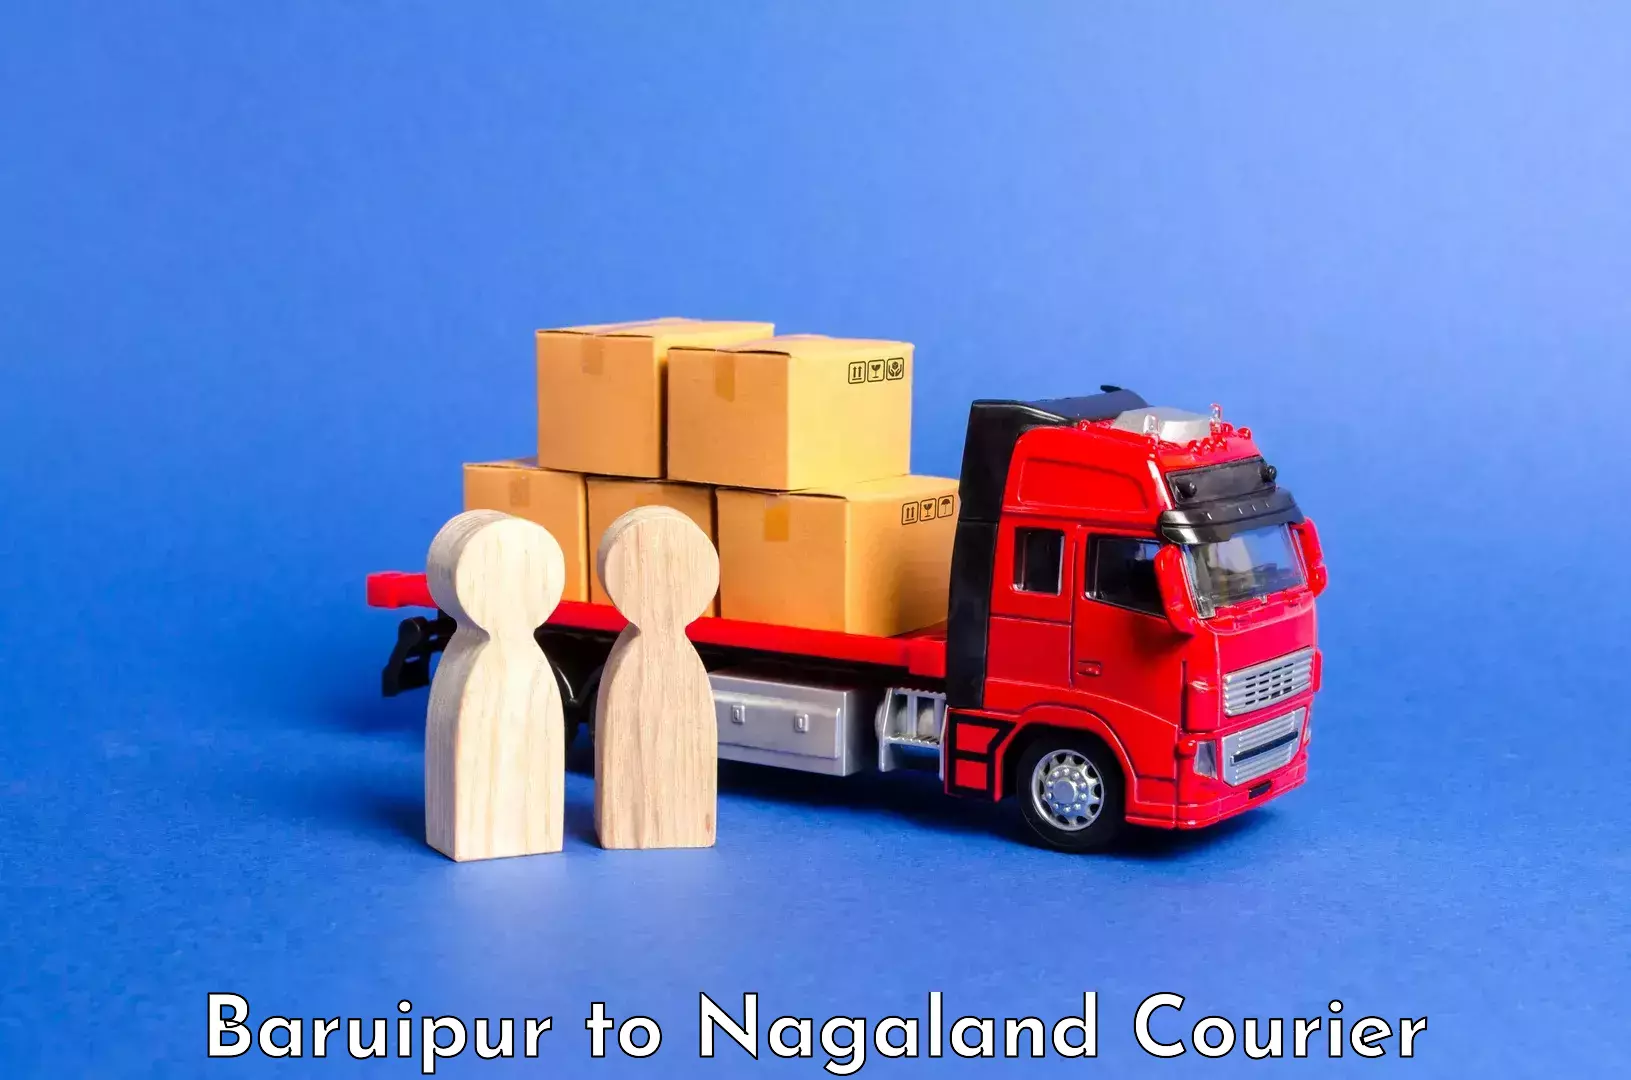 Luggage transport consultancy Baruipur to Nagaland